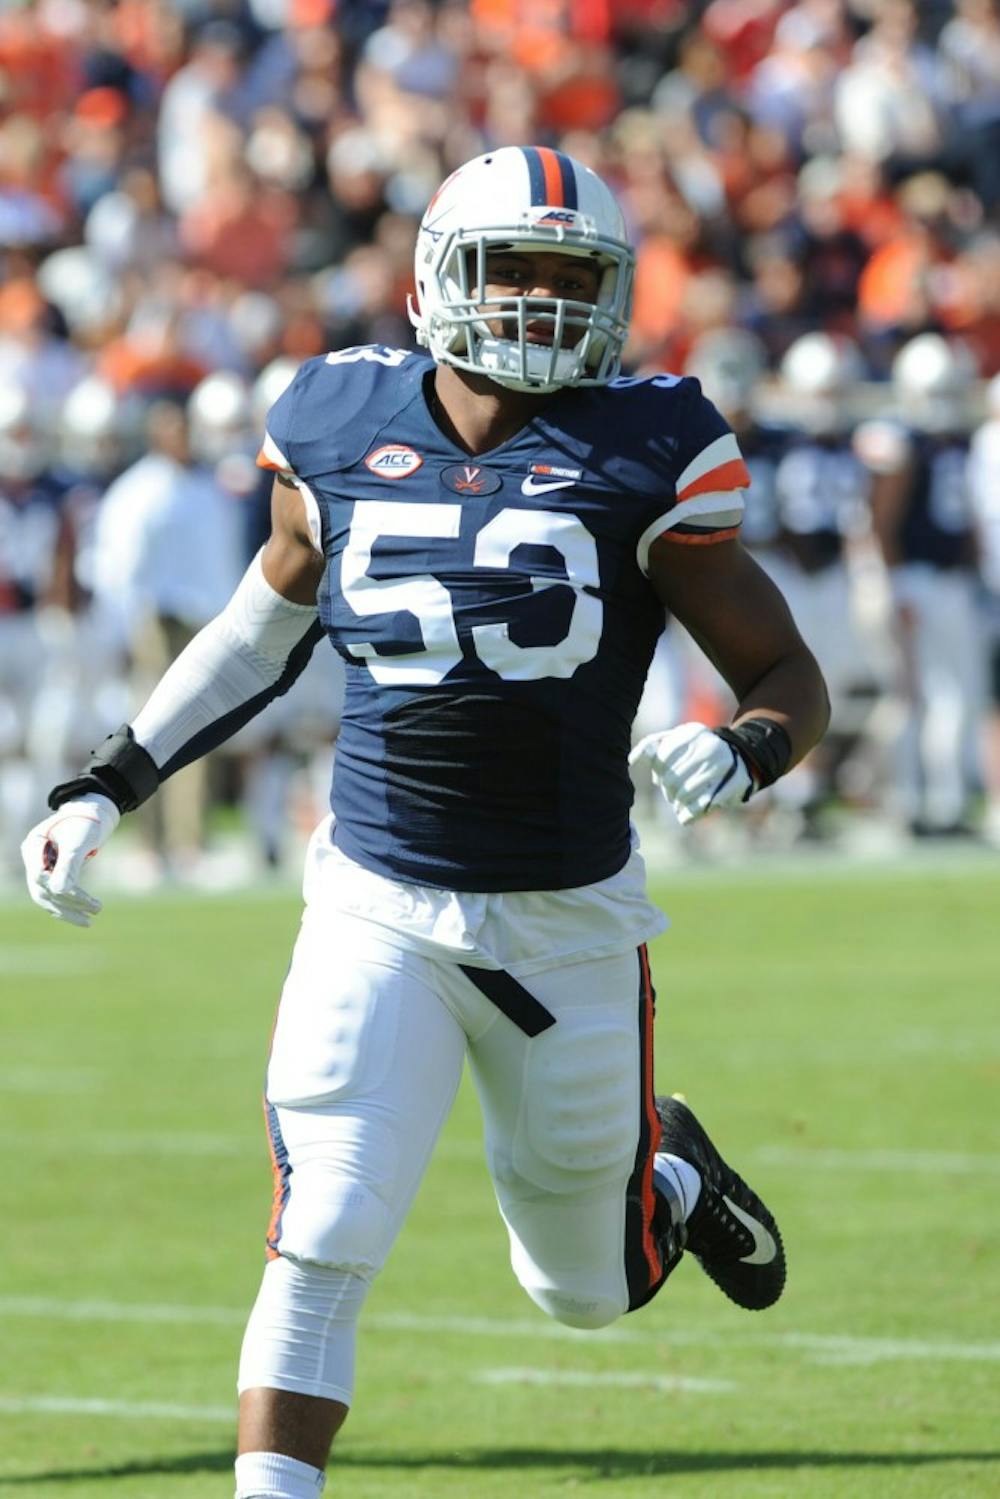 <p>Senior inside linebacker Micah Kiser and Virginia will look to stop two-game skid against Georgia Tech Saturday.&nbsp;</p>